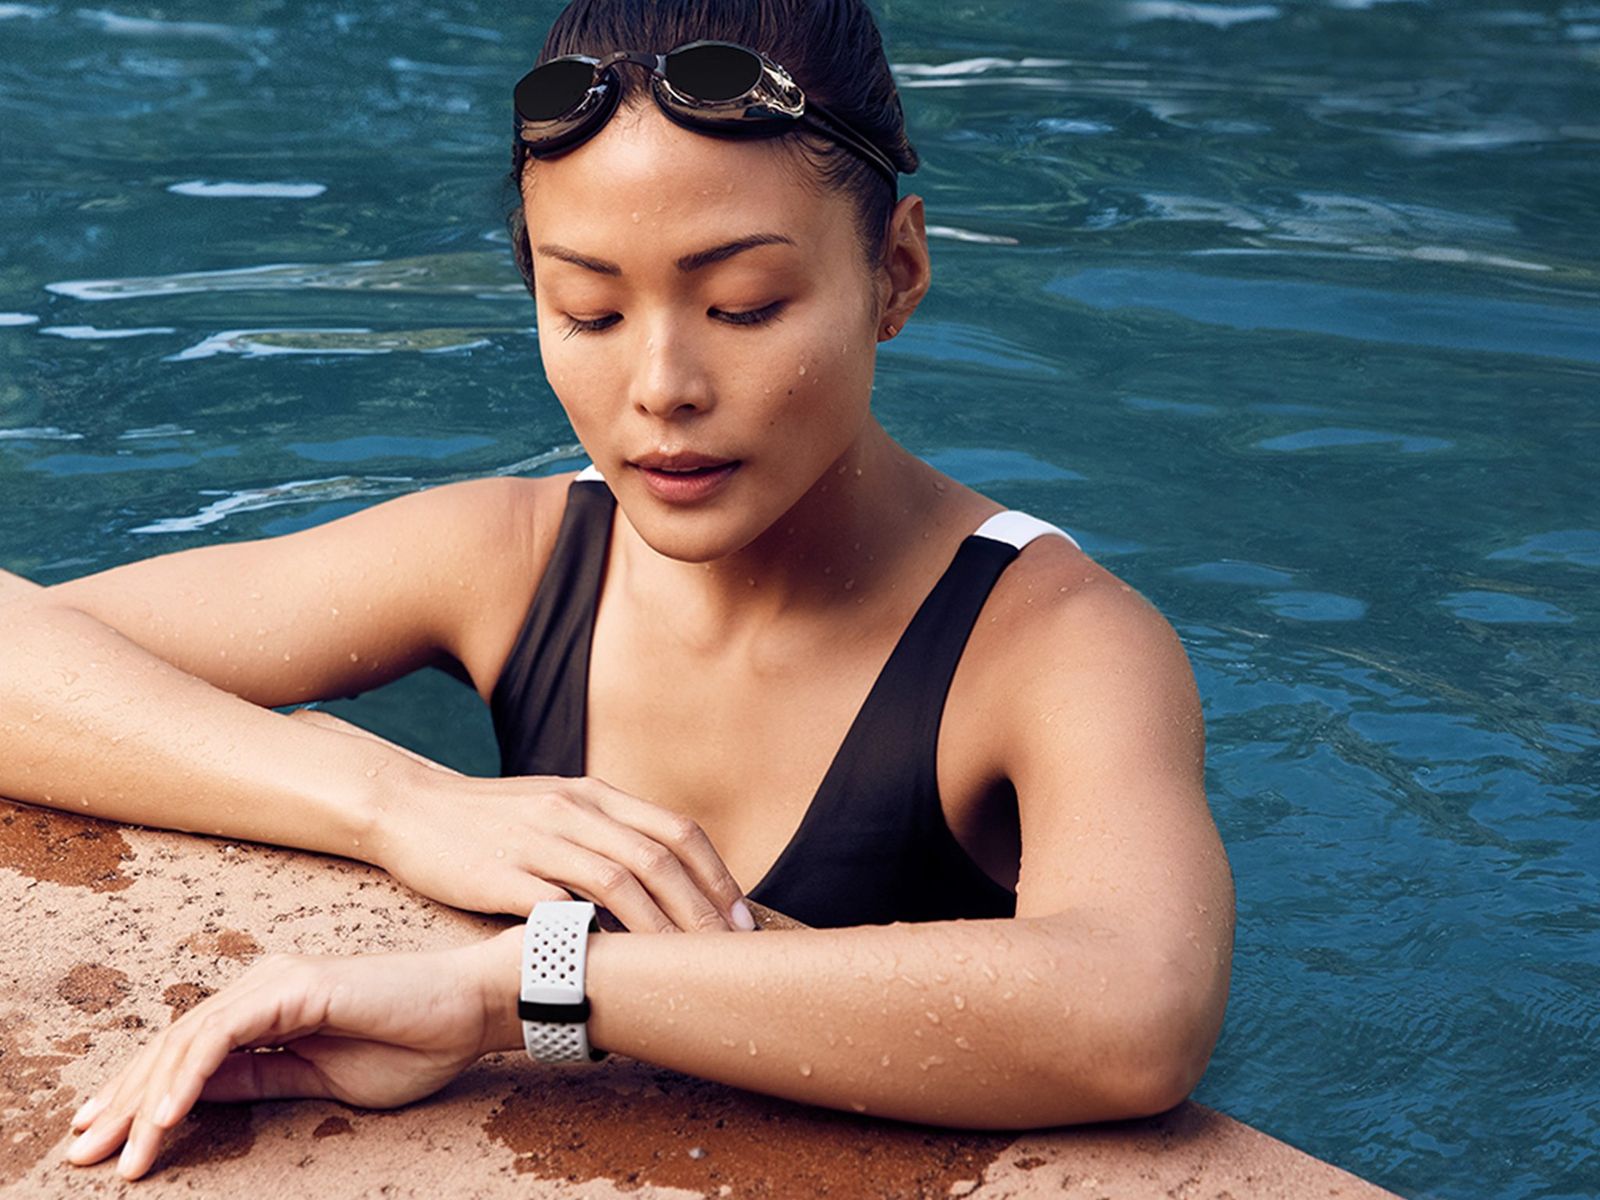 fitbit for swimming